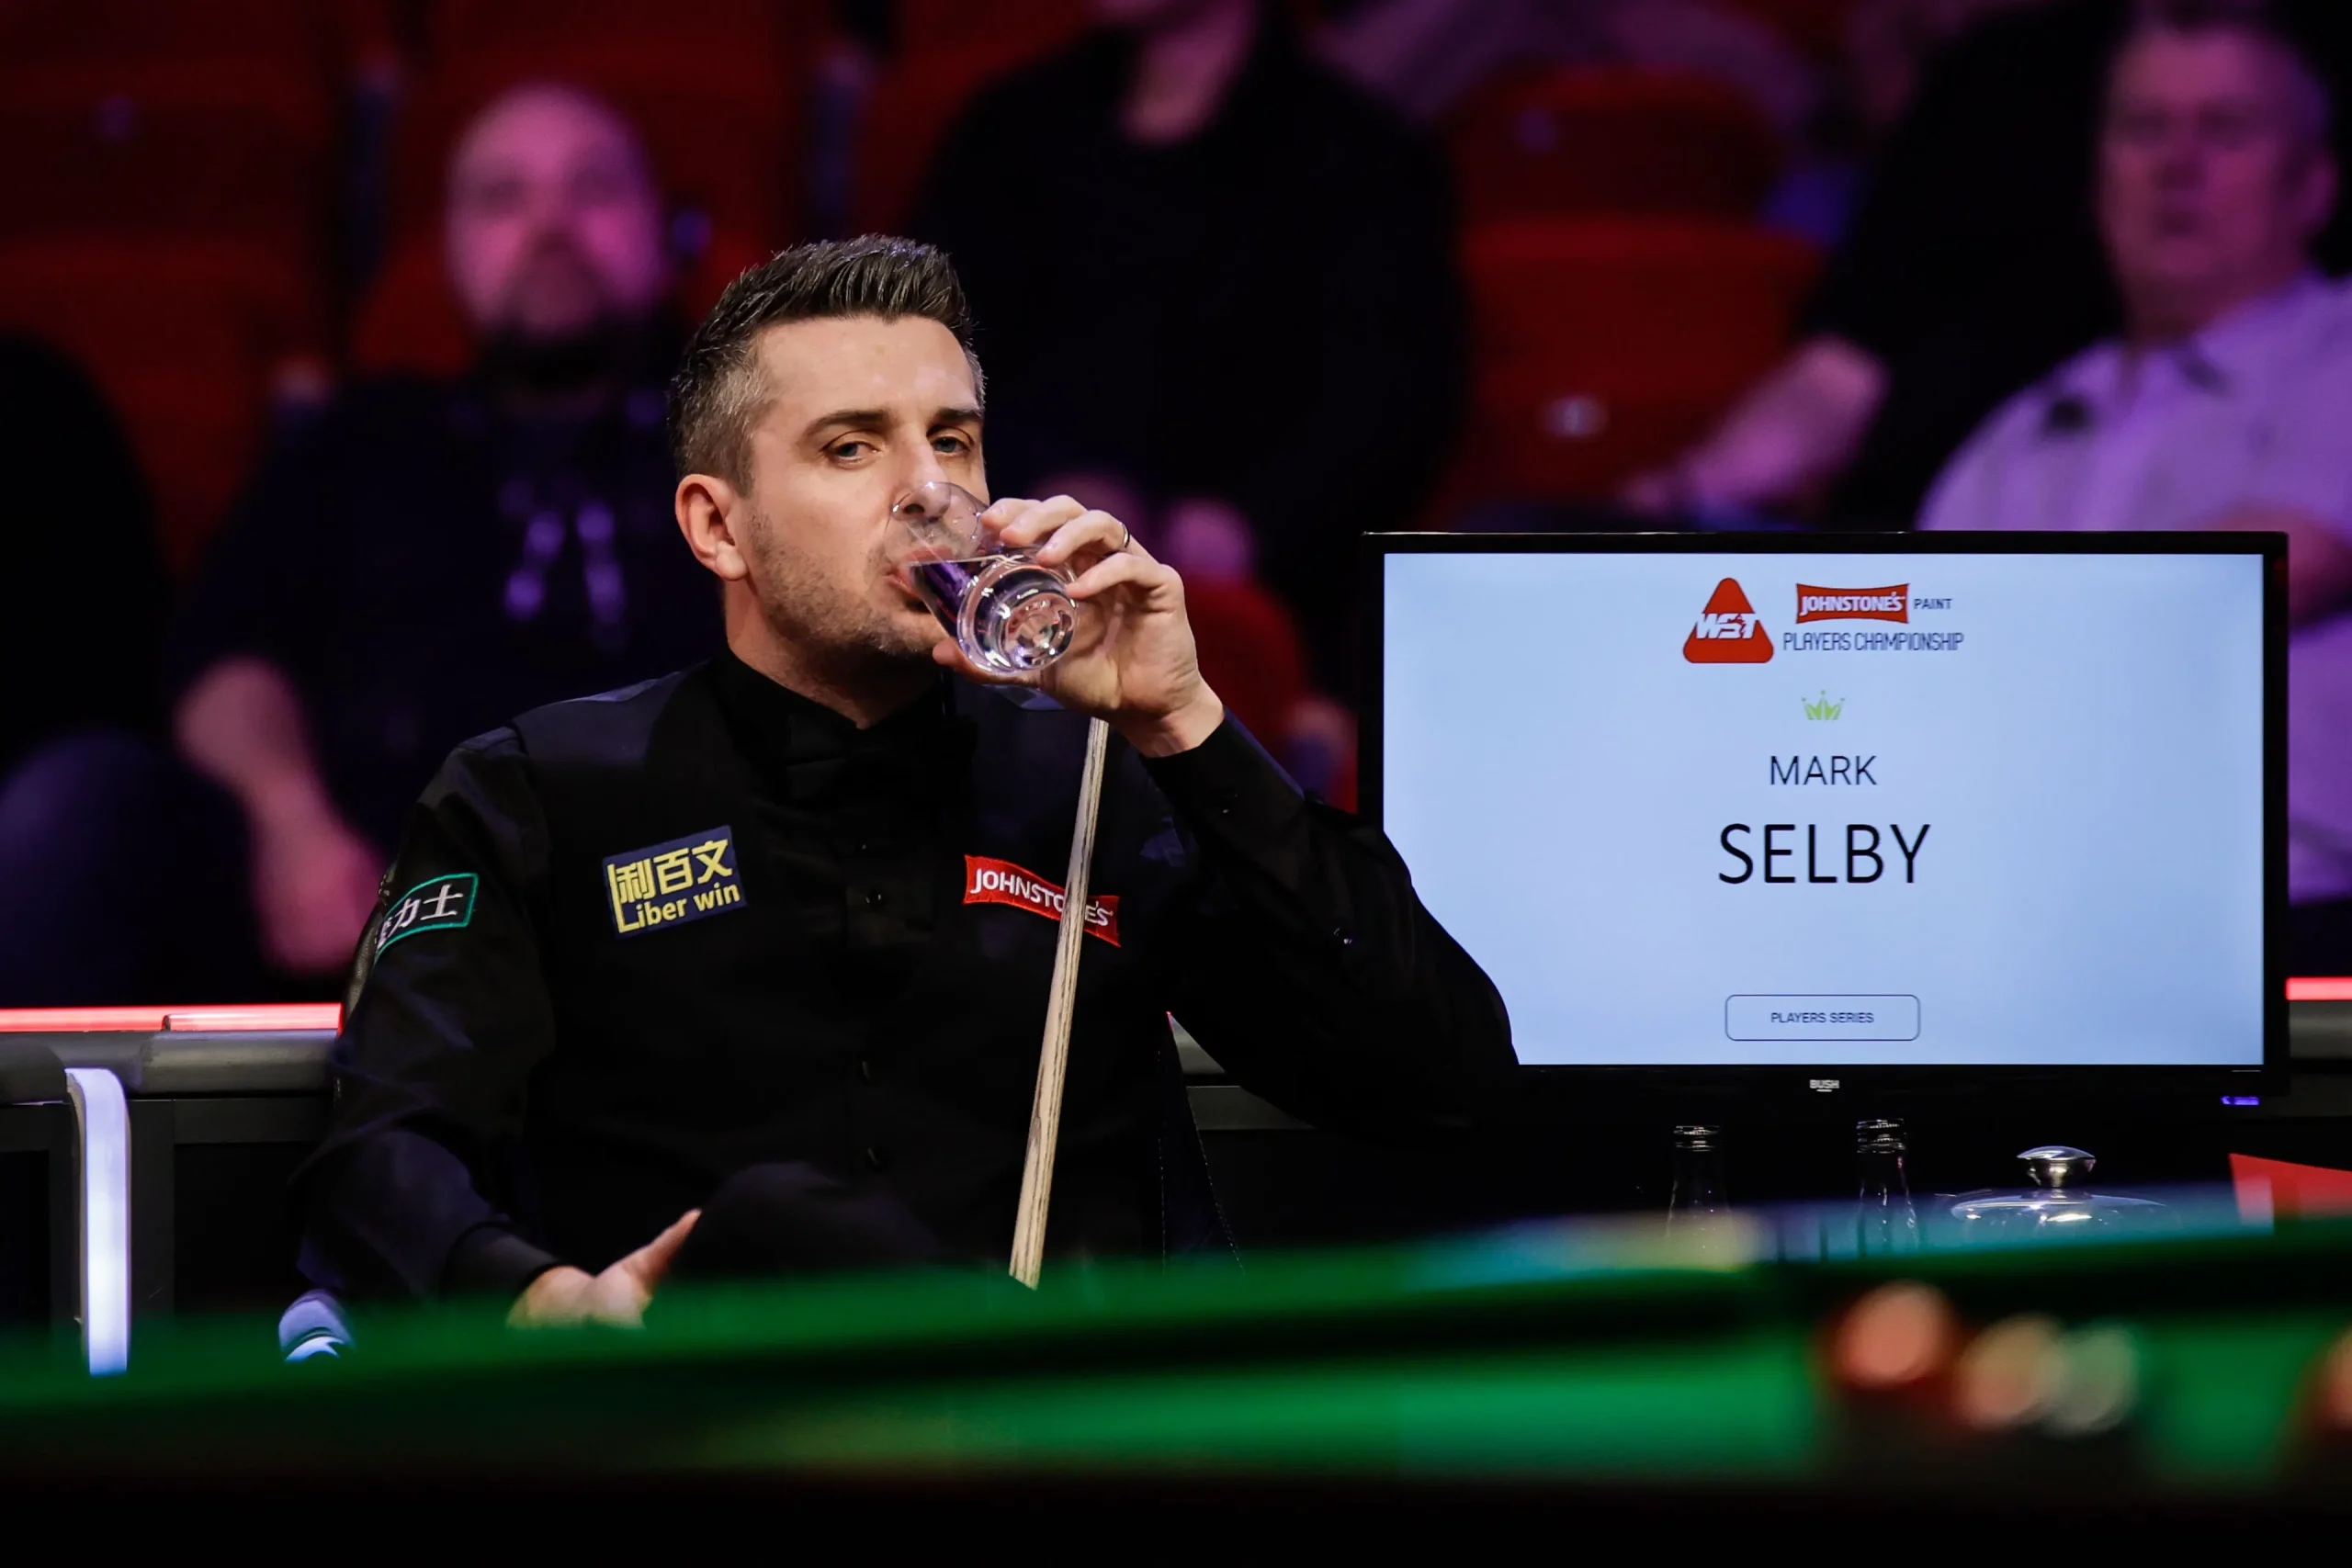 Selby’s Spectacular Whitewash: Secures Semifinal Spot with 6-0 Victory over O’Sullivan